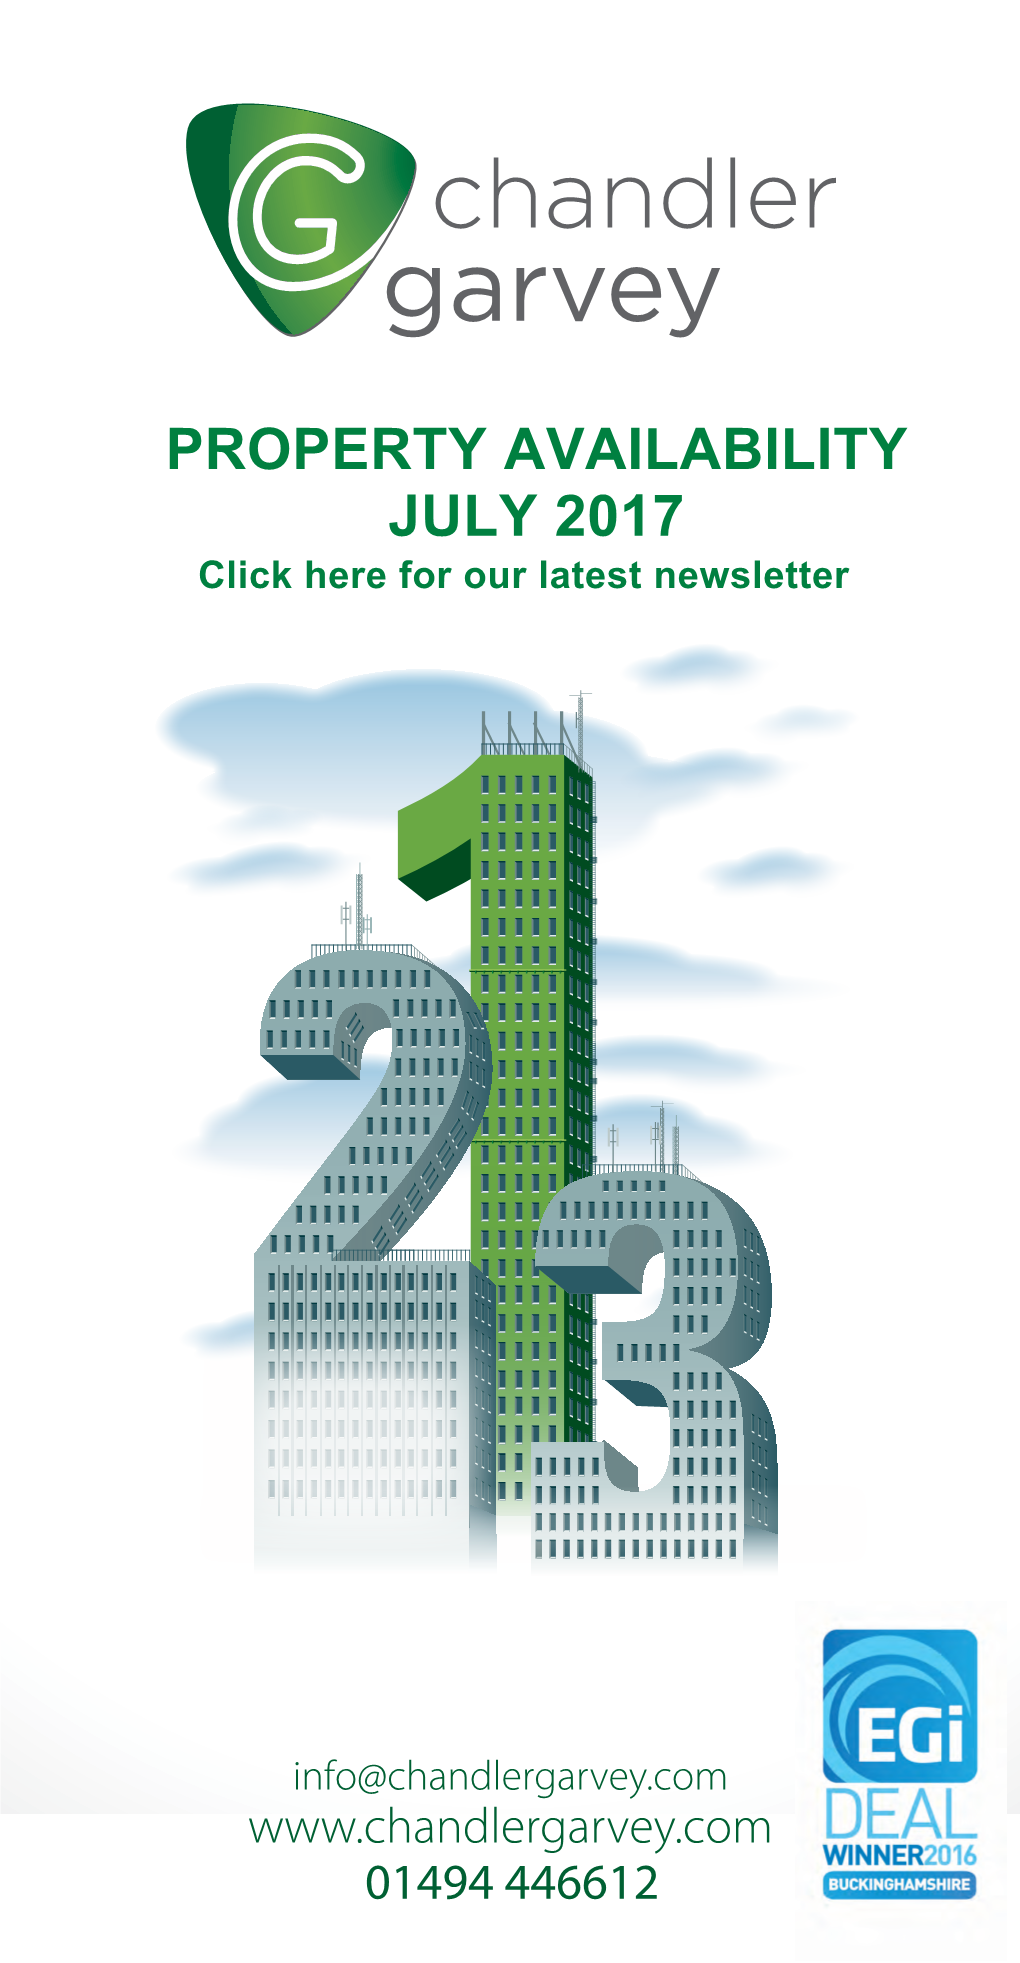 PROPERTY AVAILABILITY JULY 2017 Click Here for Our Latest Newsletter